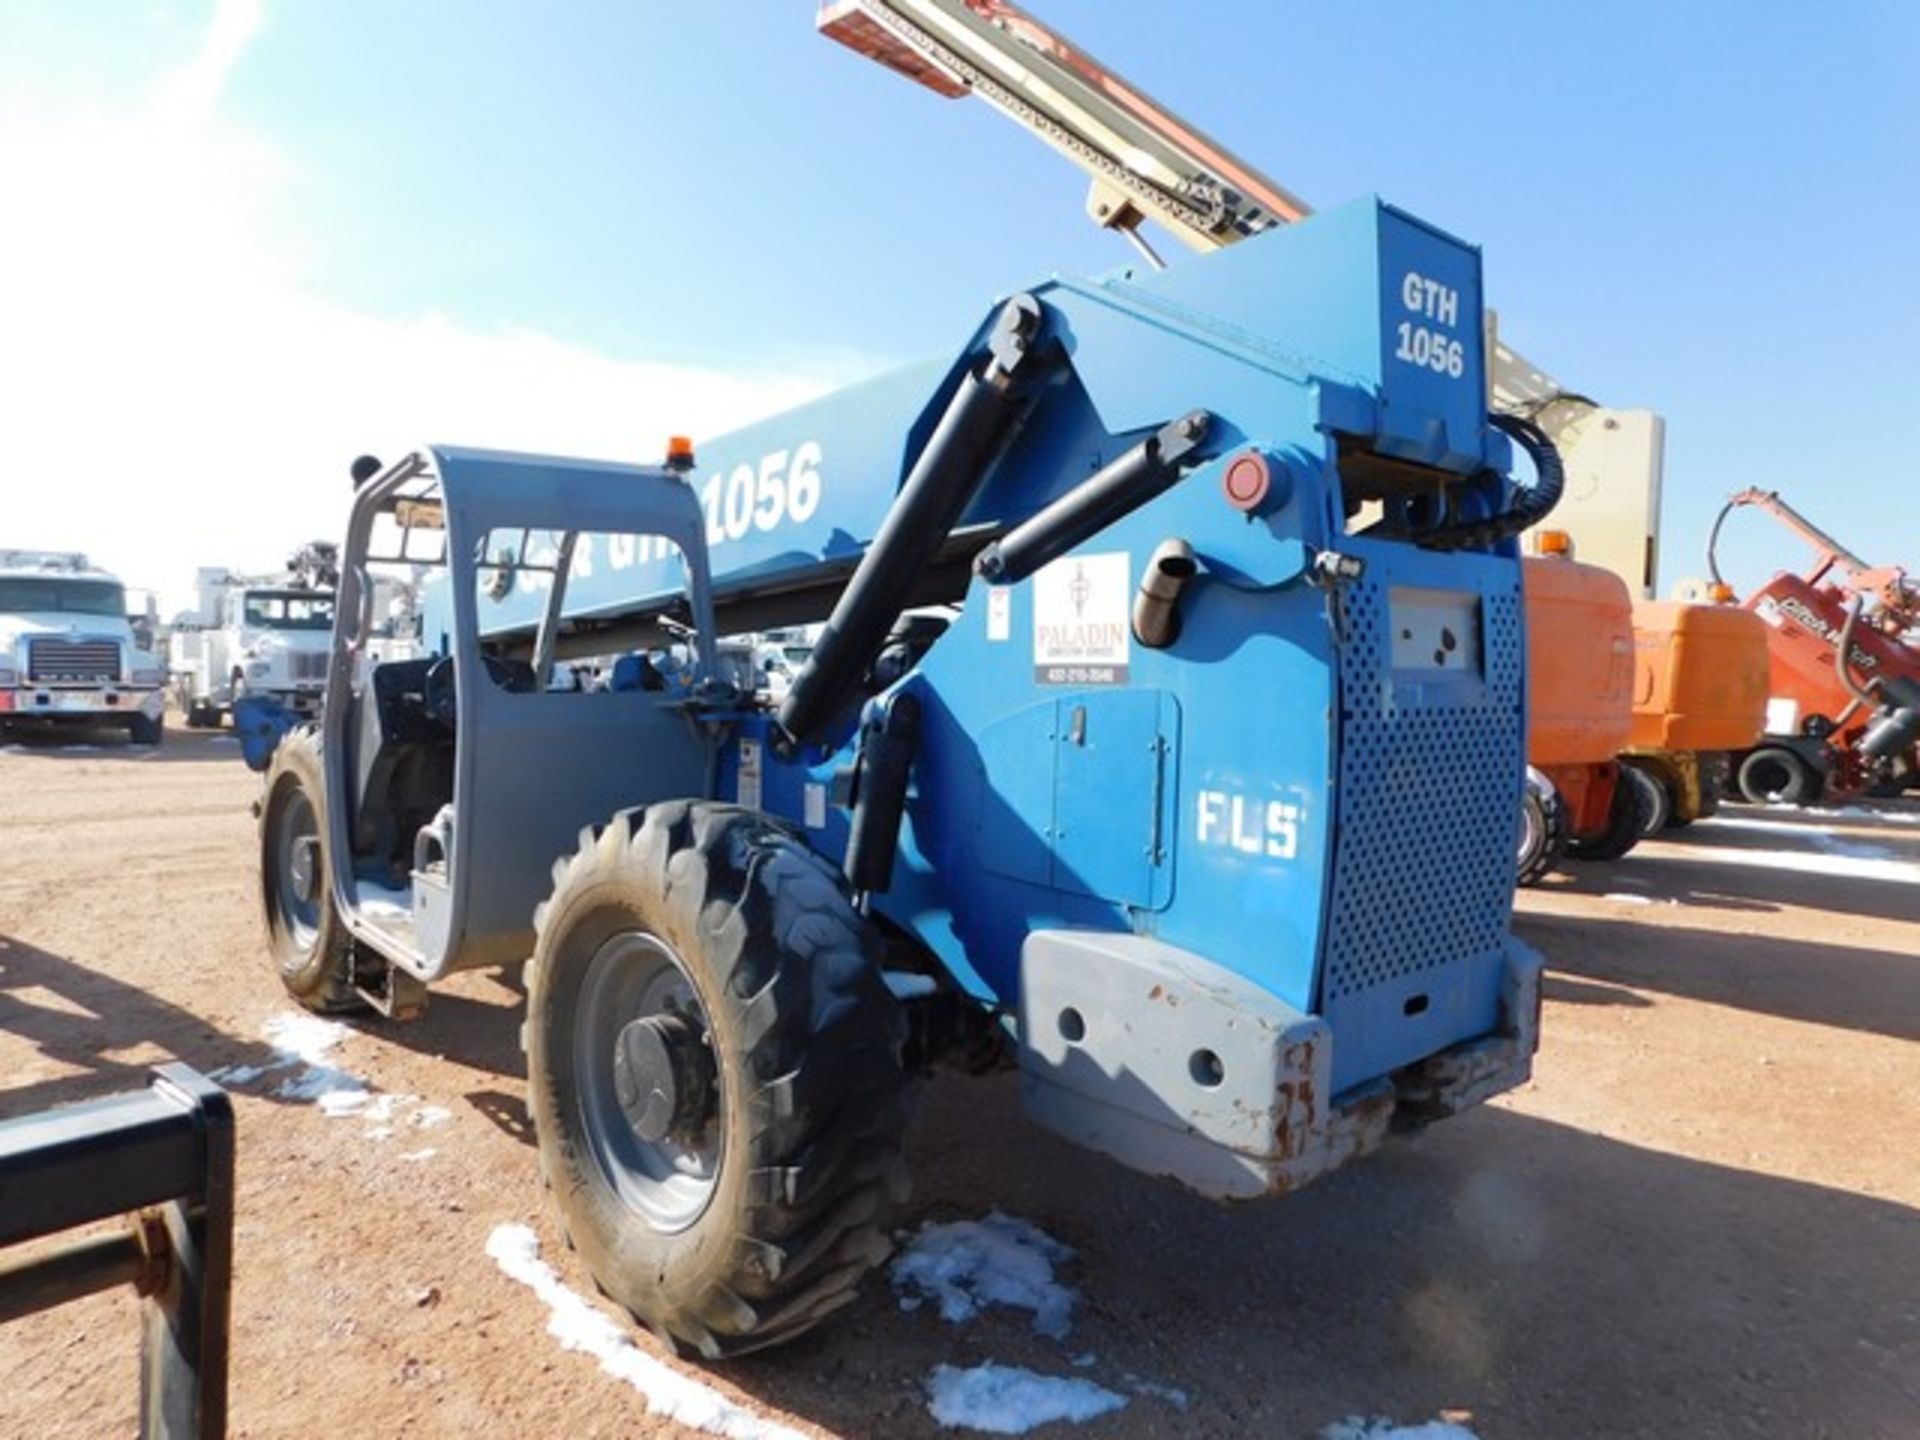 Located in YARD 1 - Midland, TX (1906) 2012 GENIE GTH - 1056 TELESCOPIC FORKLIFT - Image 5 of 7